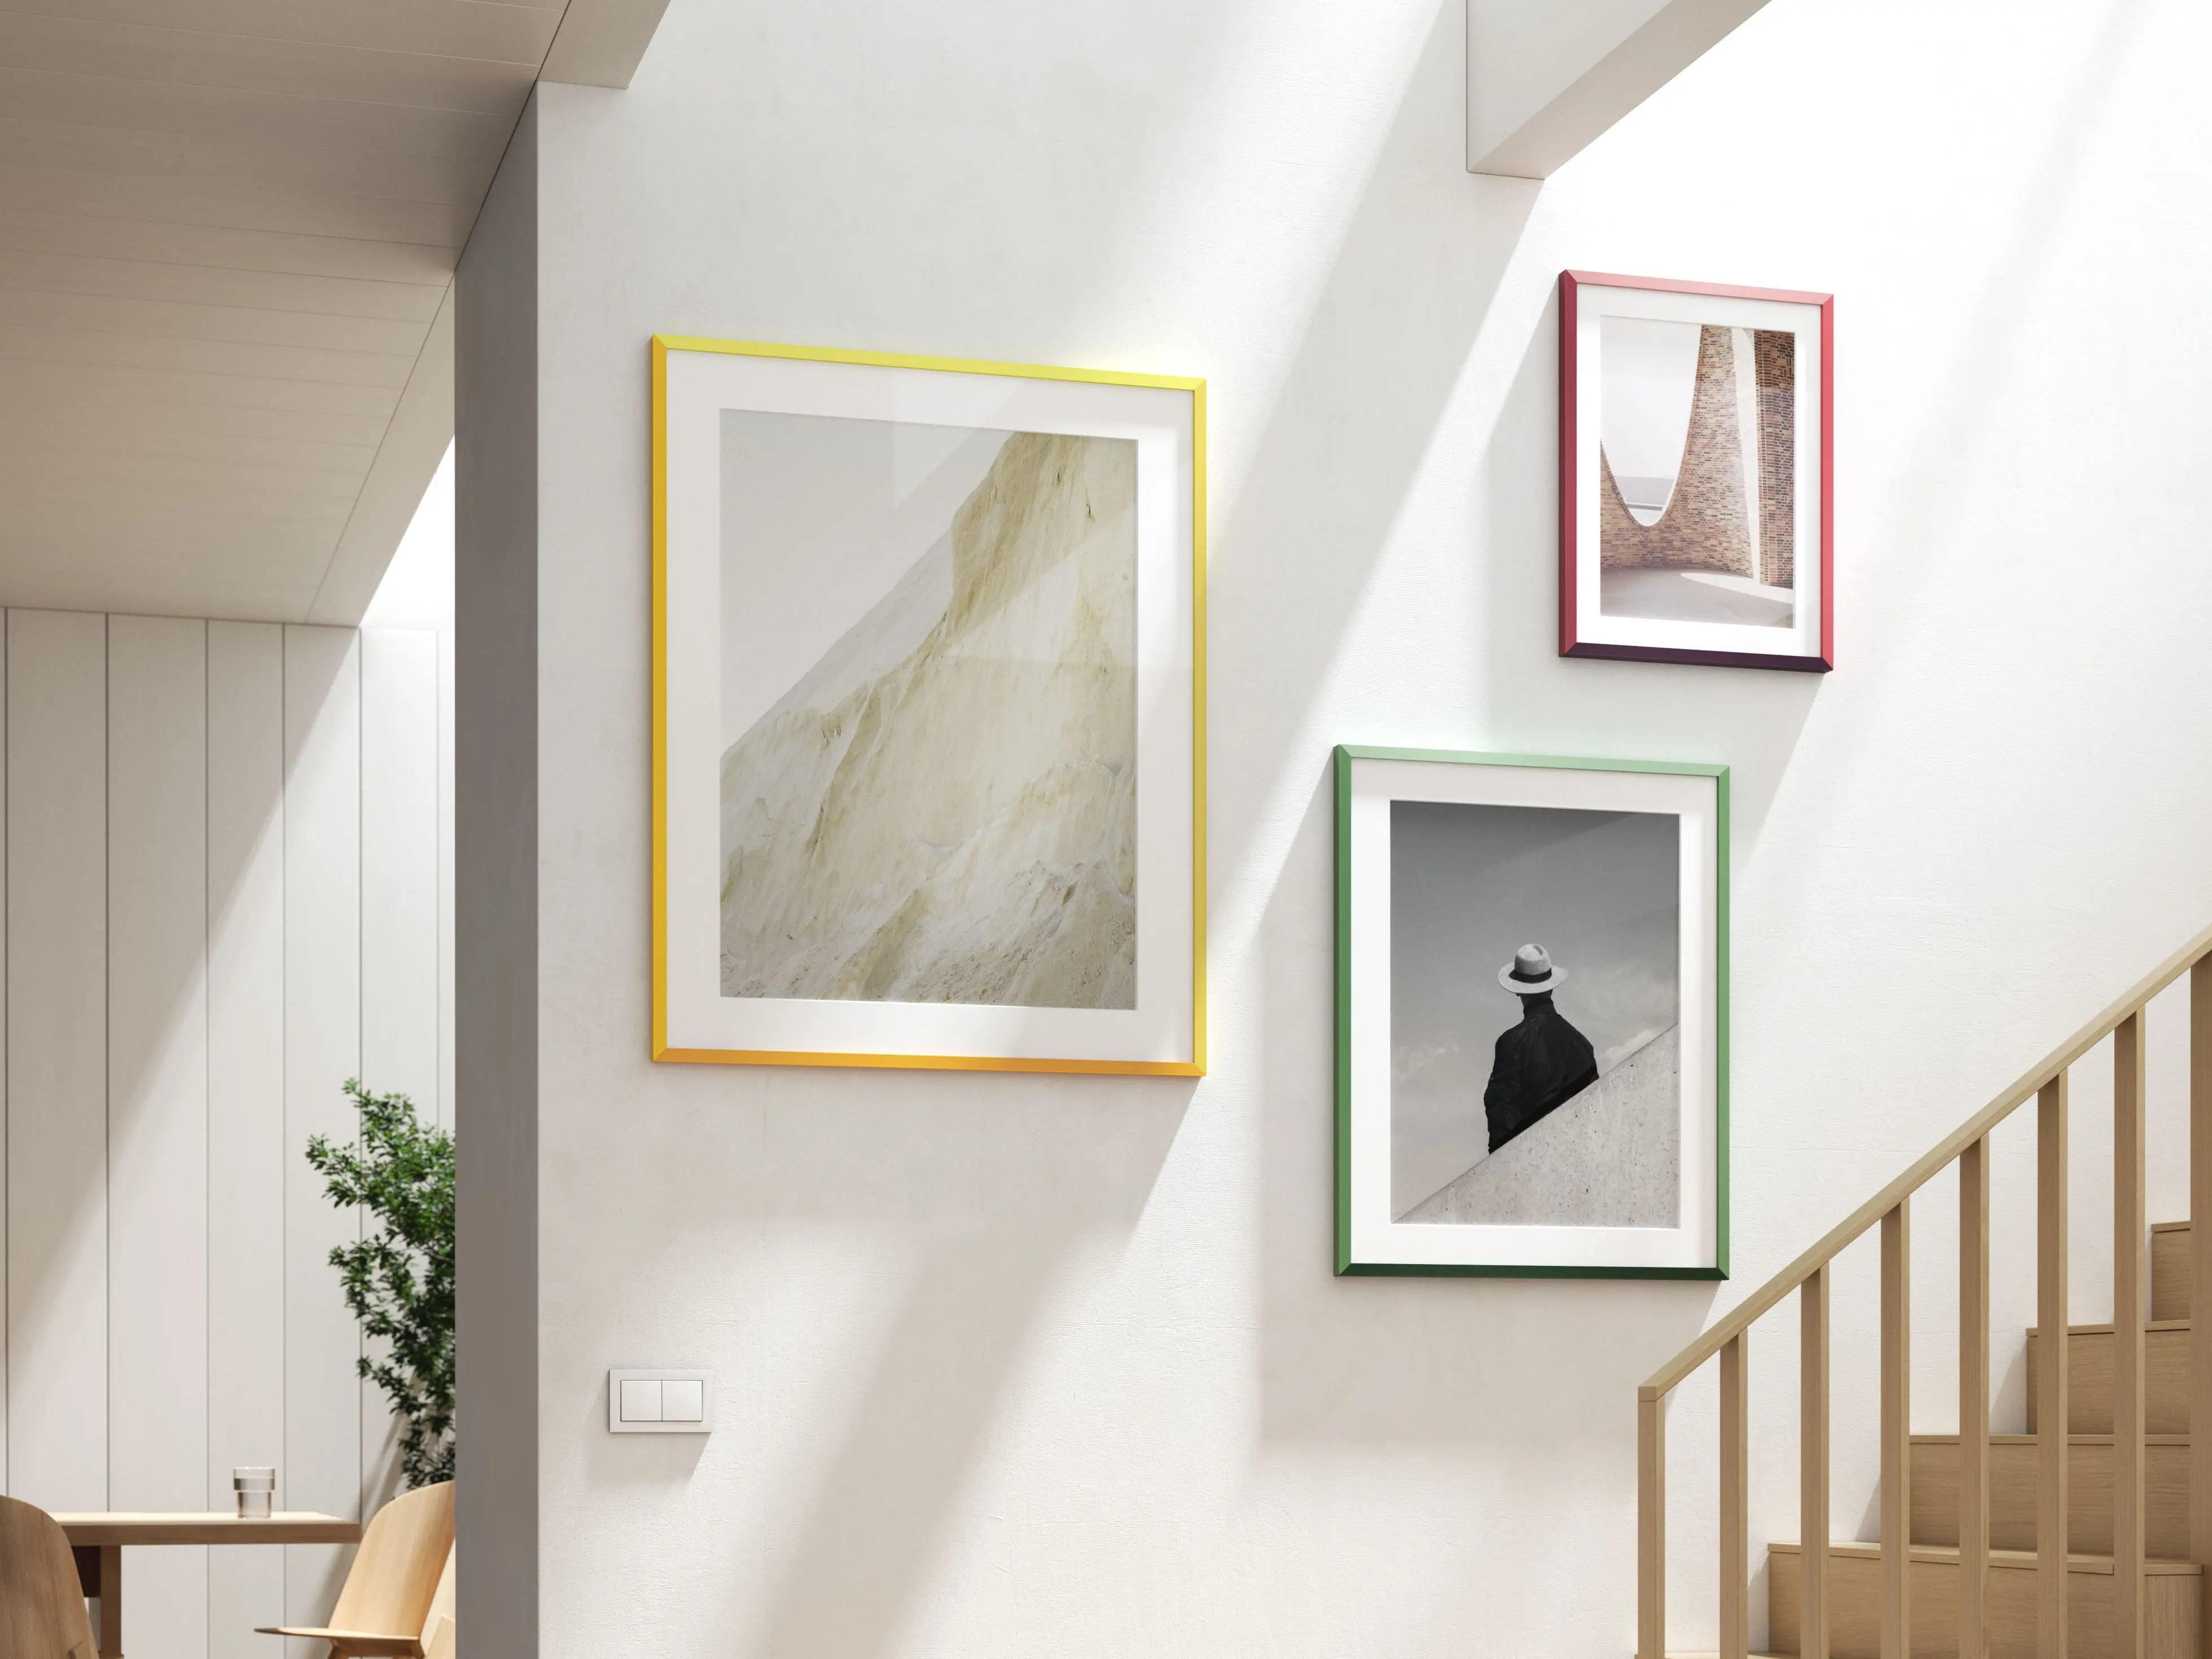 Three design edition frames, one of each color, hanging on a wall.